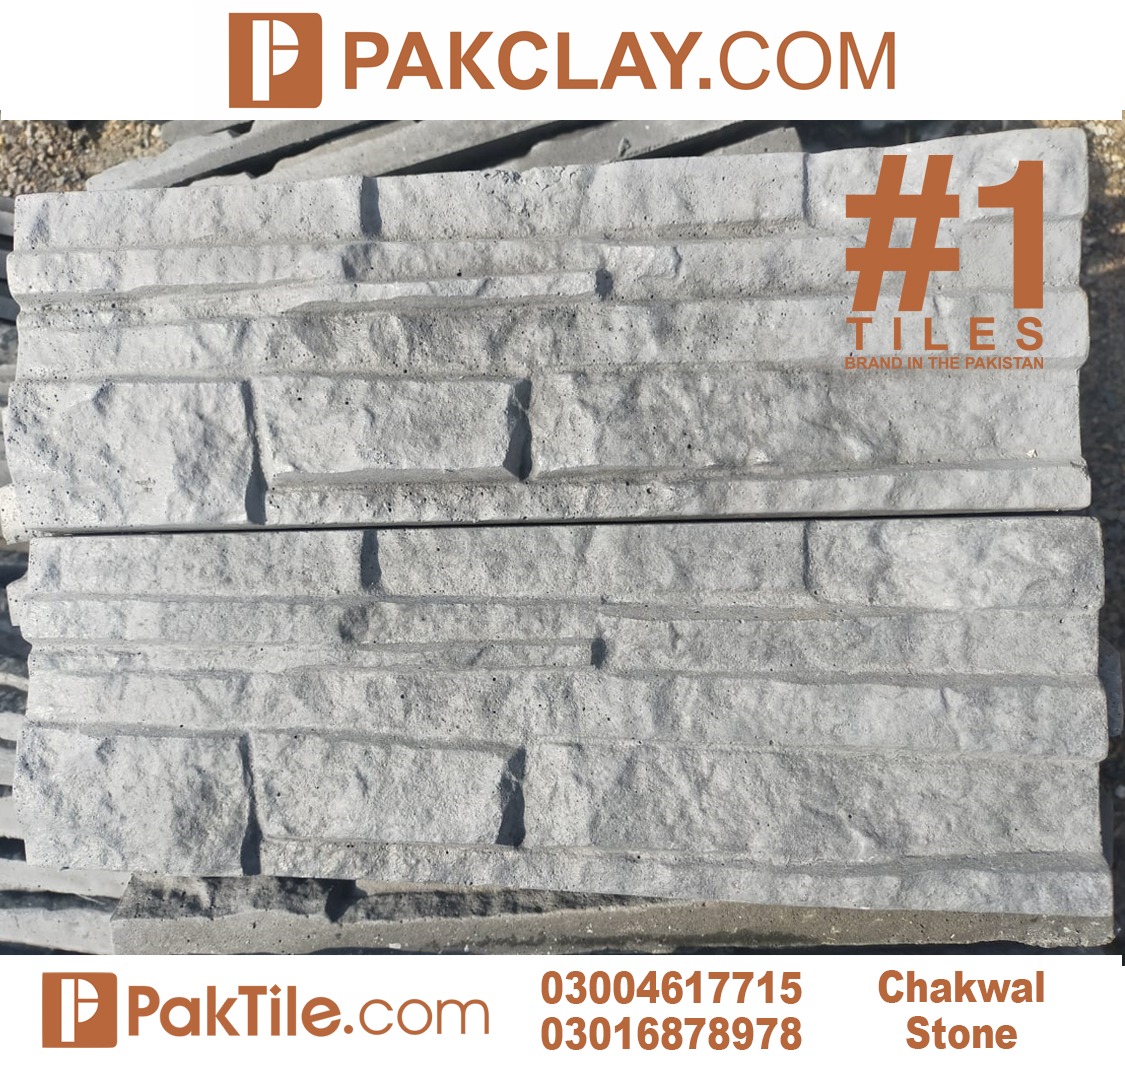 Exterior Wall Tile Price List